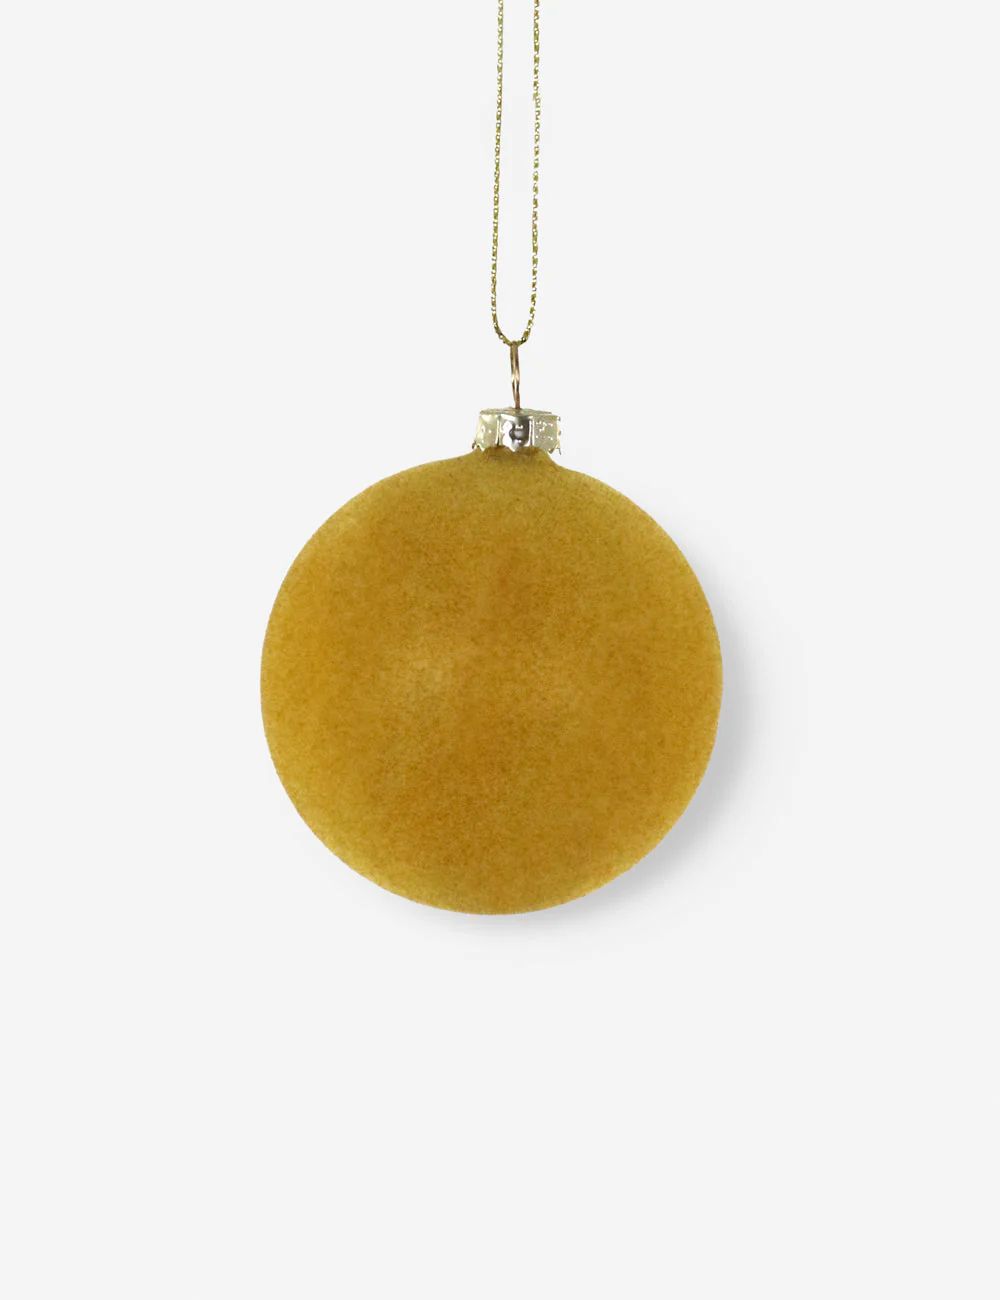 Velvet Ball Ornaments (Set of 2) by Cody Foster and Co | Lulu and Georgia 